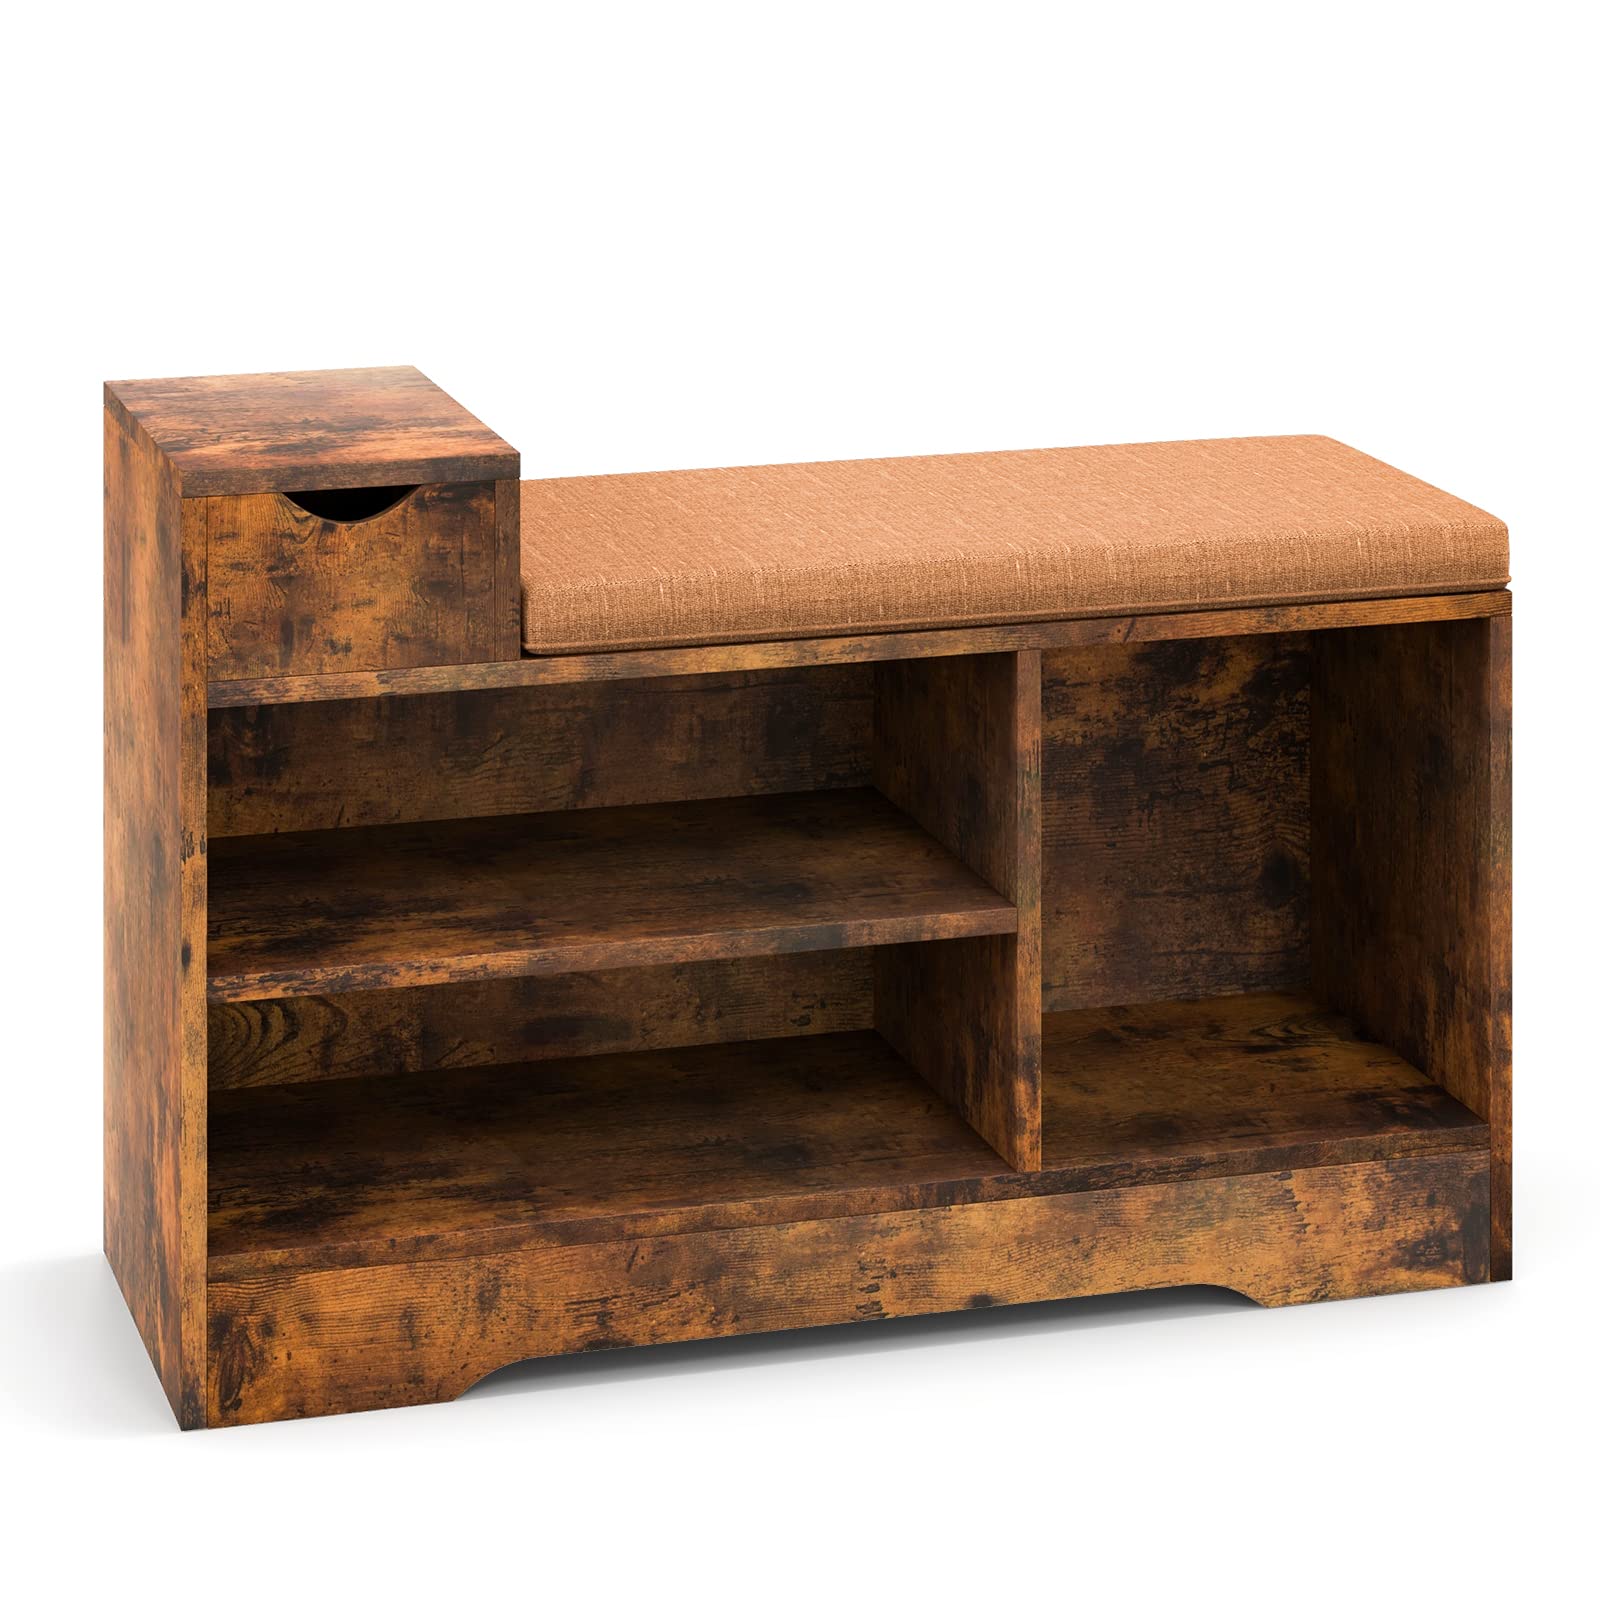 Giantex Industrial Shoe Storage Bench - Entryway Shoe Bench with Removable Cushion, Storage Drawer, Rustic Brow